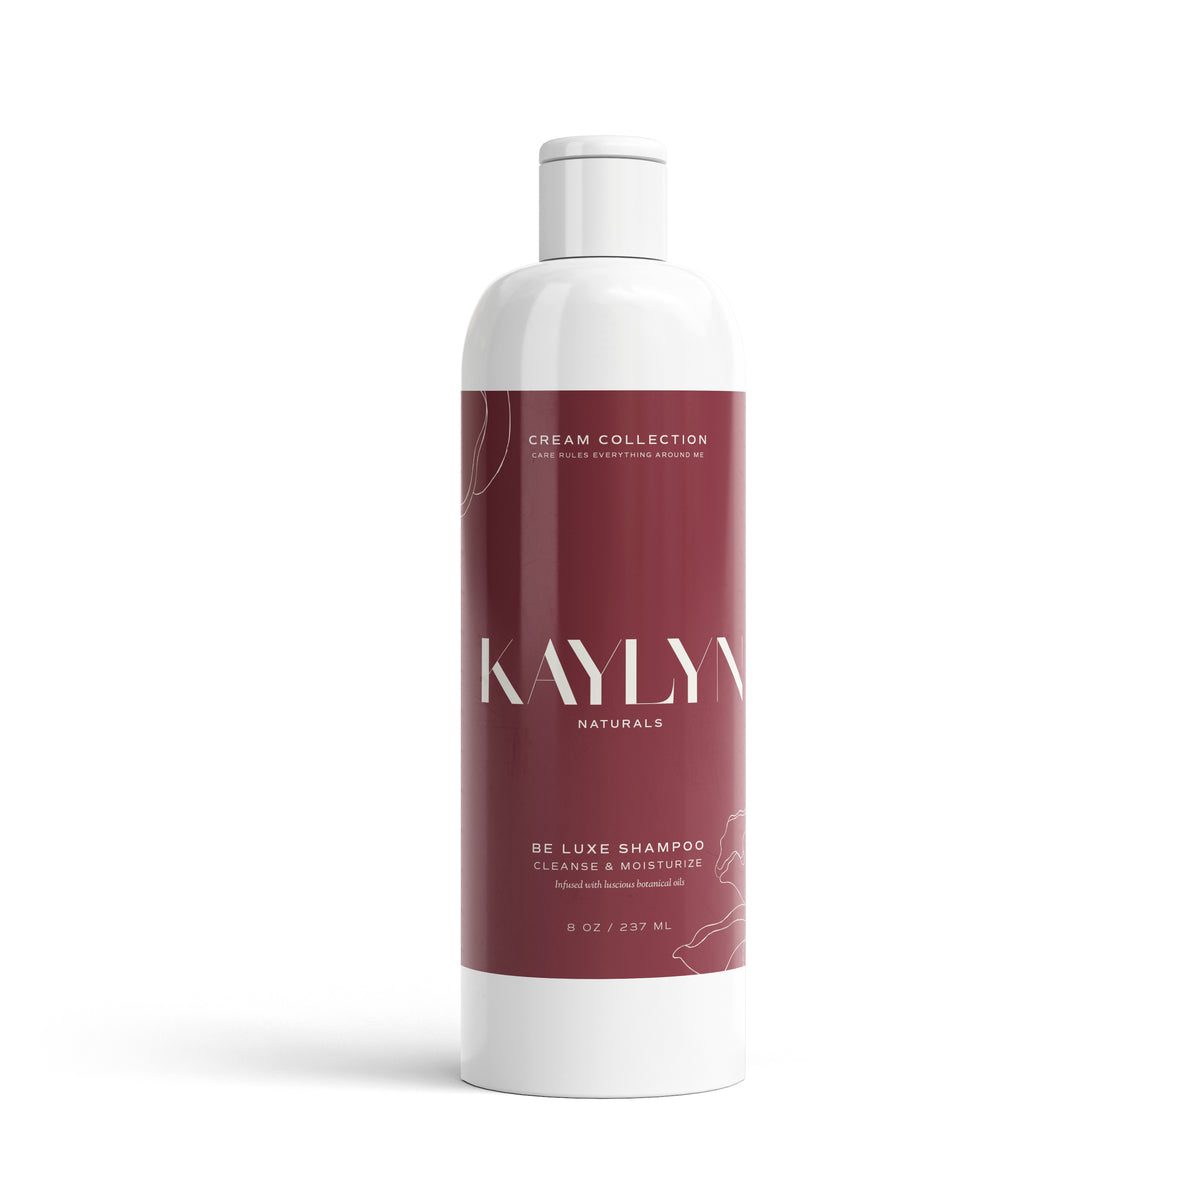 Luxe Shampoo – Kaylyn Naturals